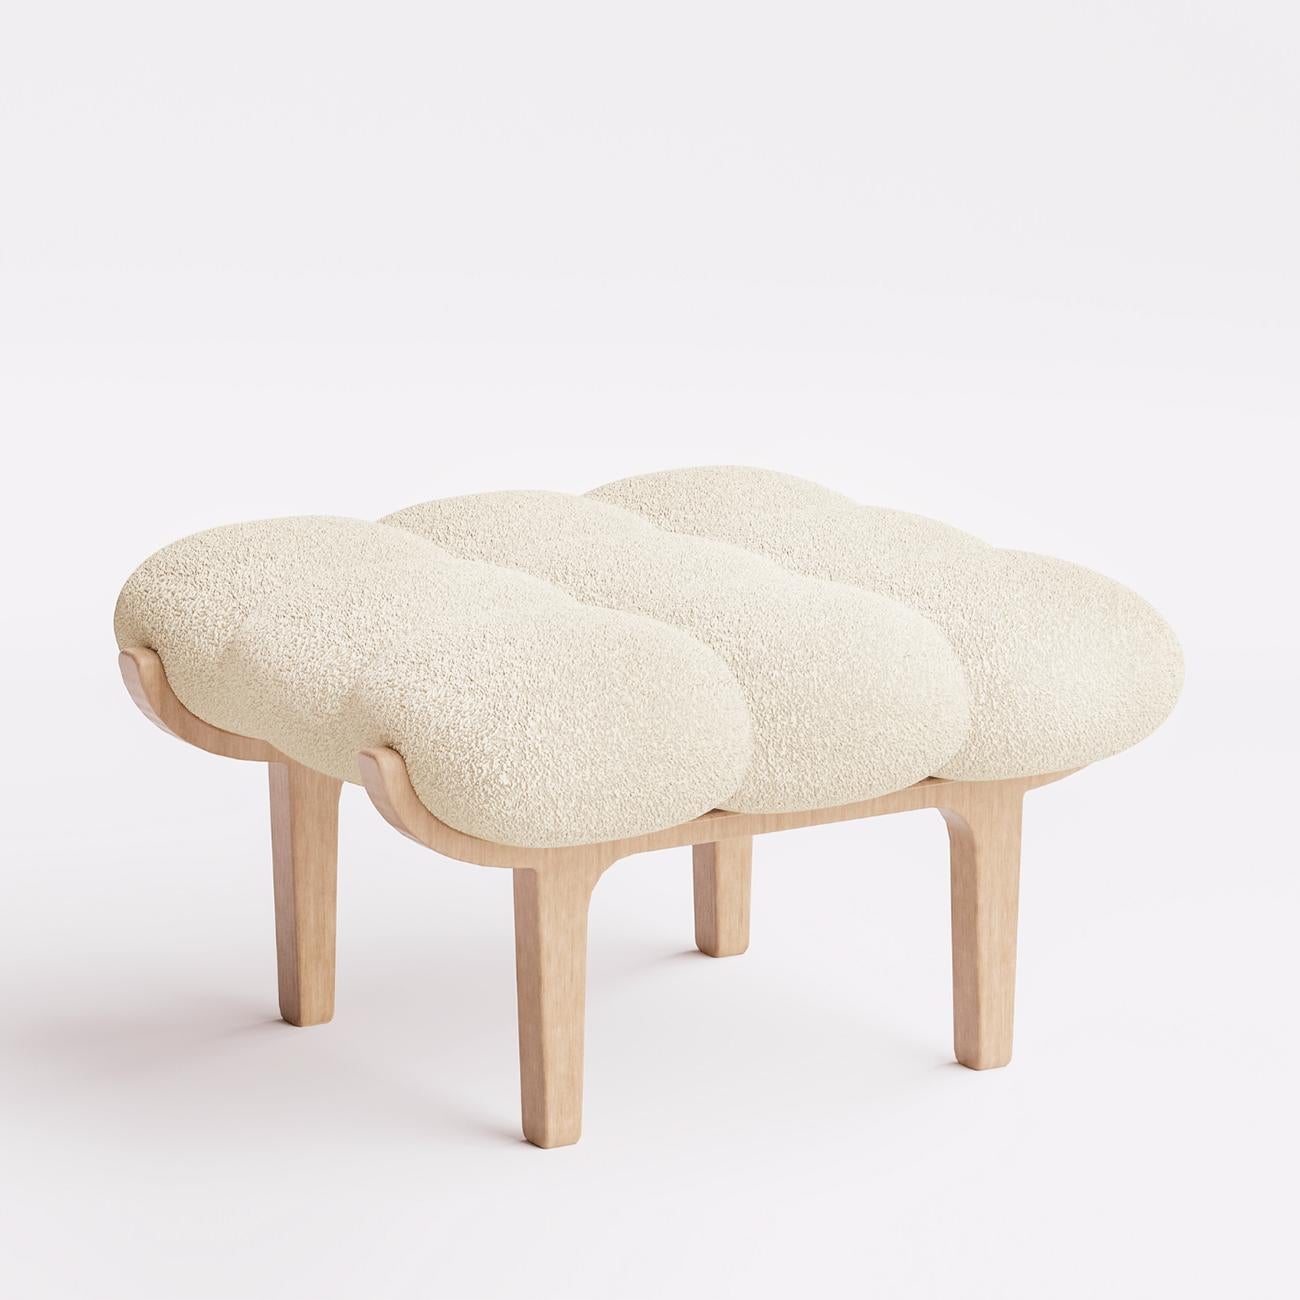 Stool Cloudy with solid birch wood structure in oak 
Matt varnished finish. Upholstered and covered with white 
Bouclé cream fabric. Available with Armchair, on request.
Also available with other fabric bouclé cream colors, on request.